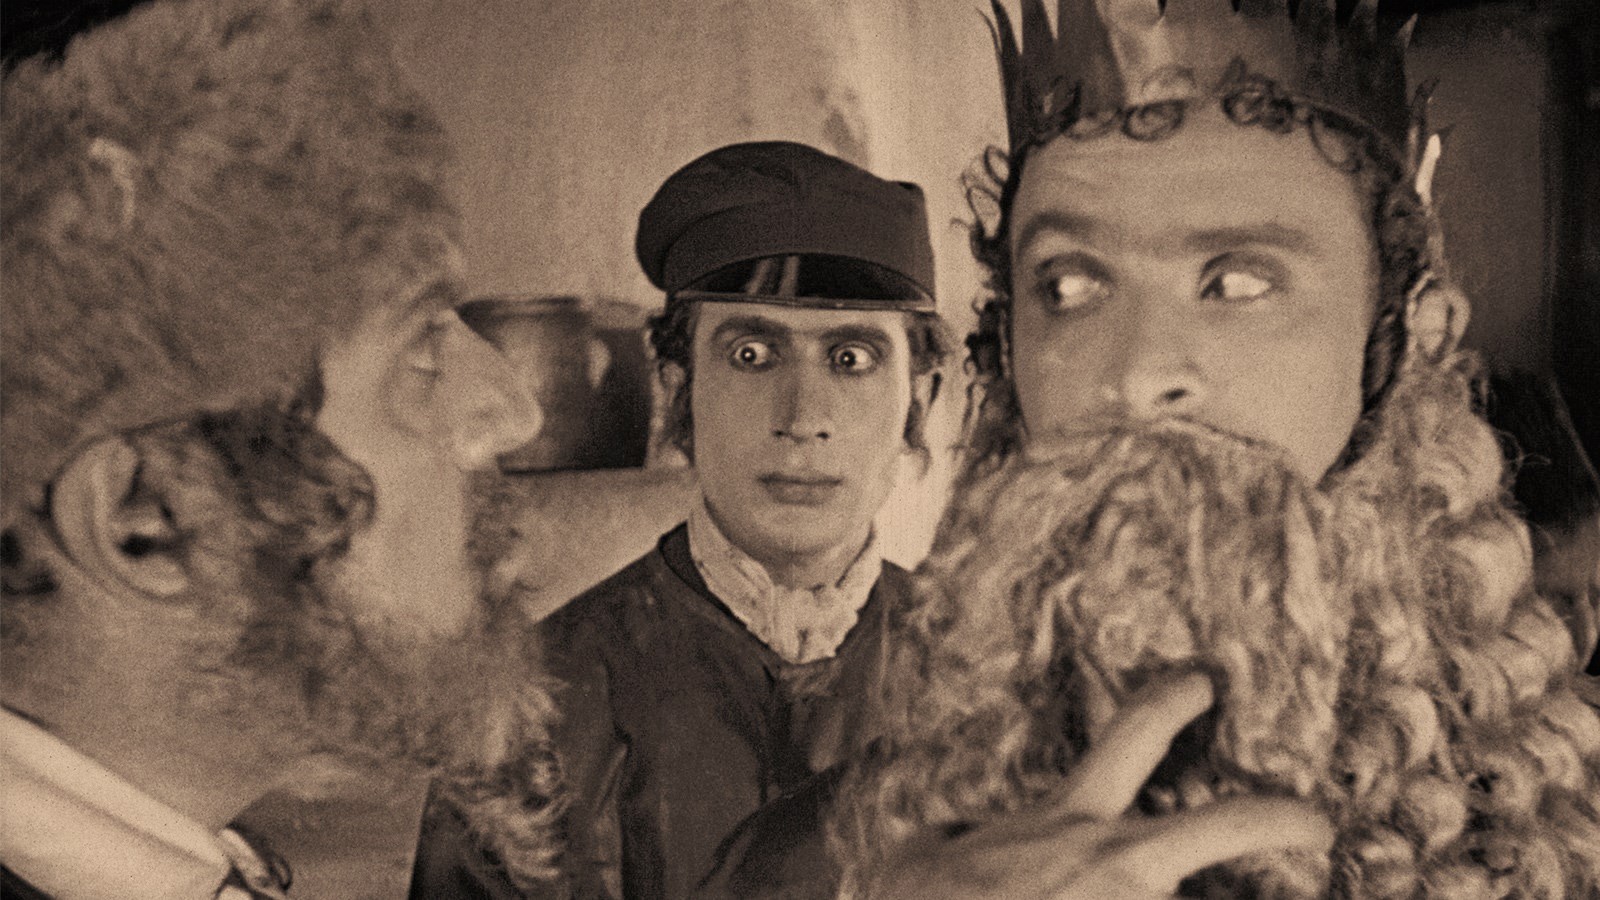 A still from the silent film 